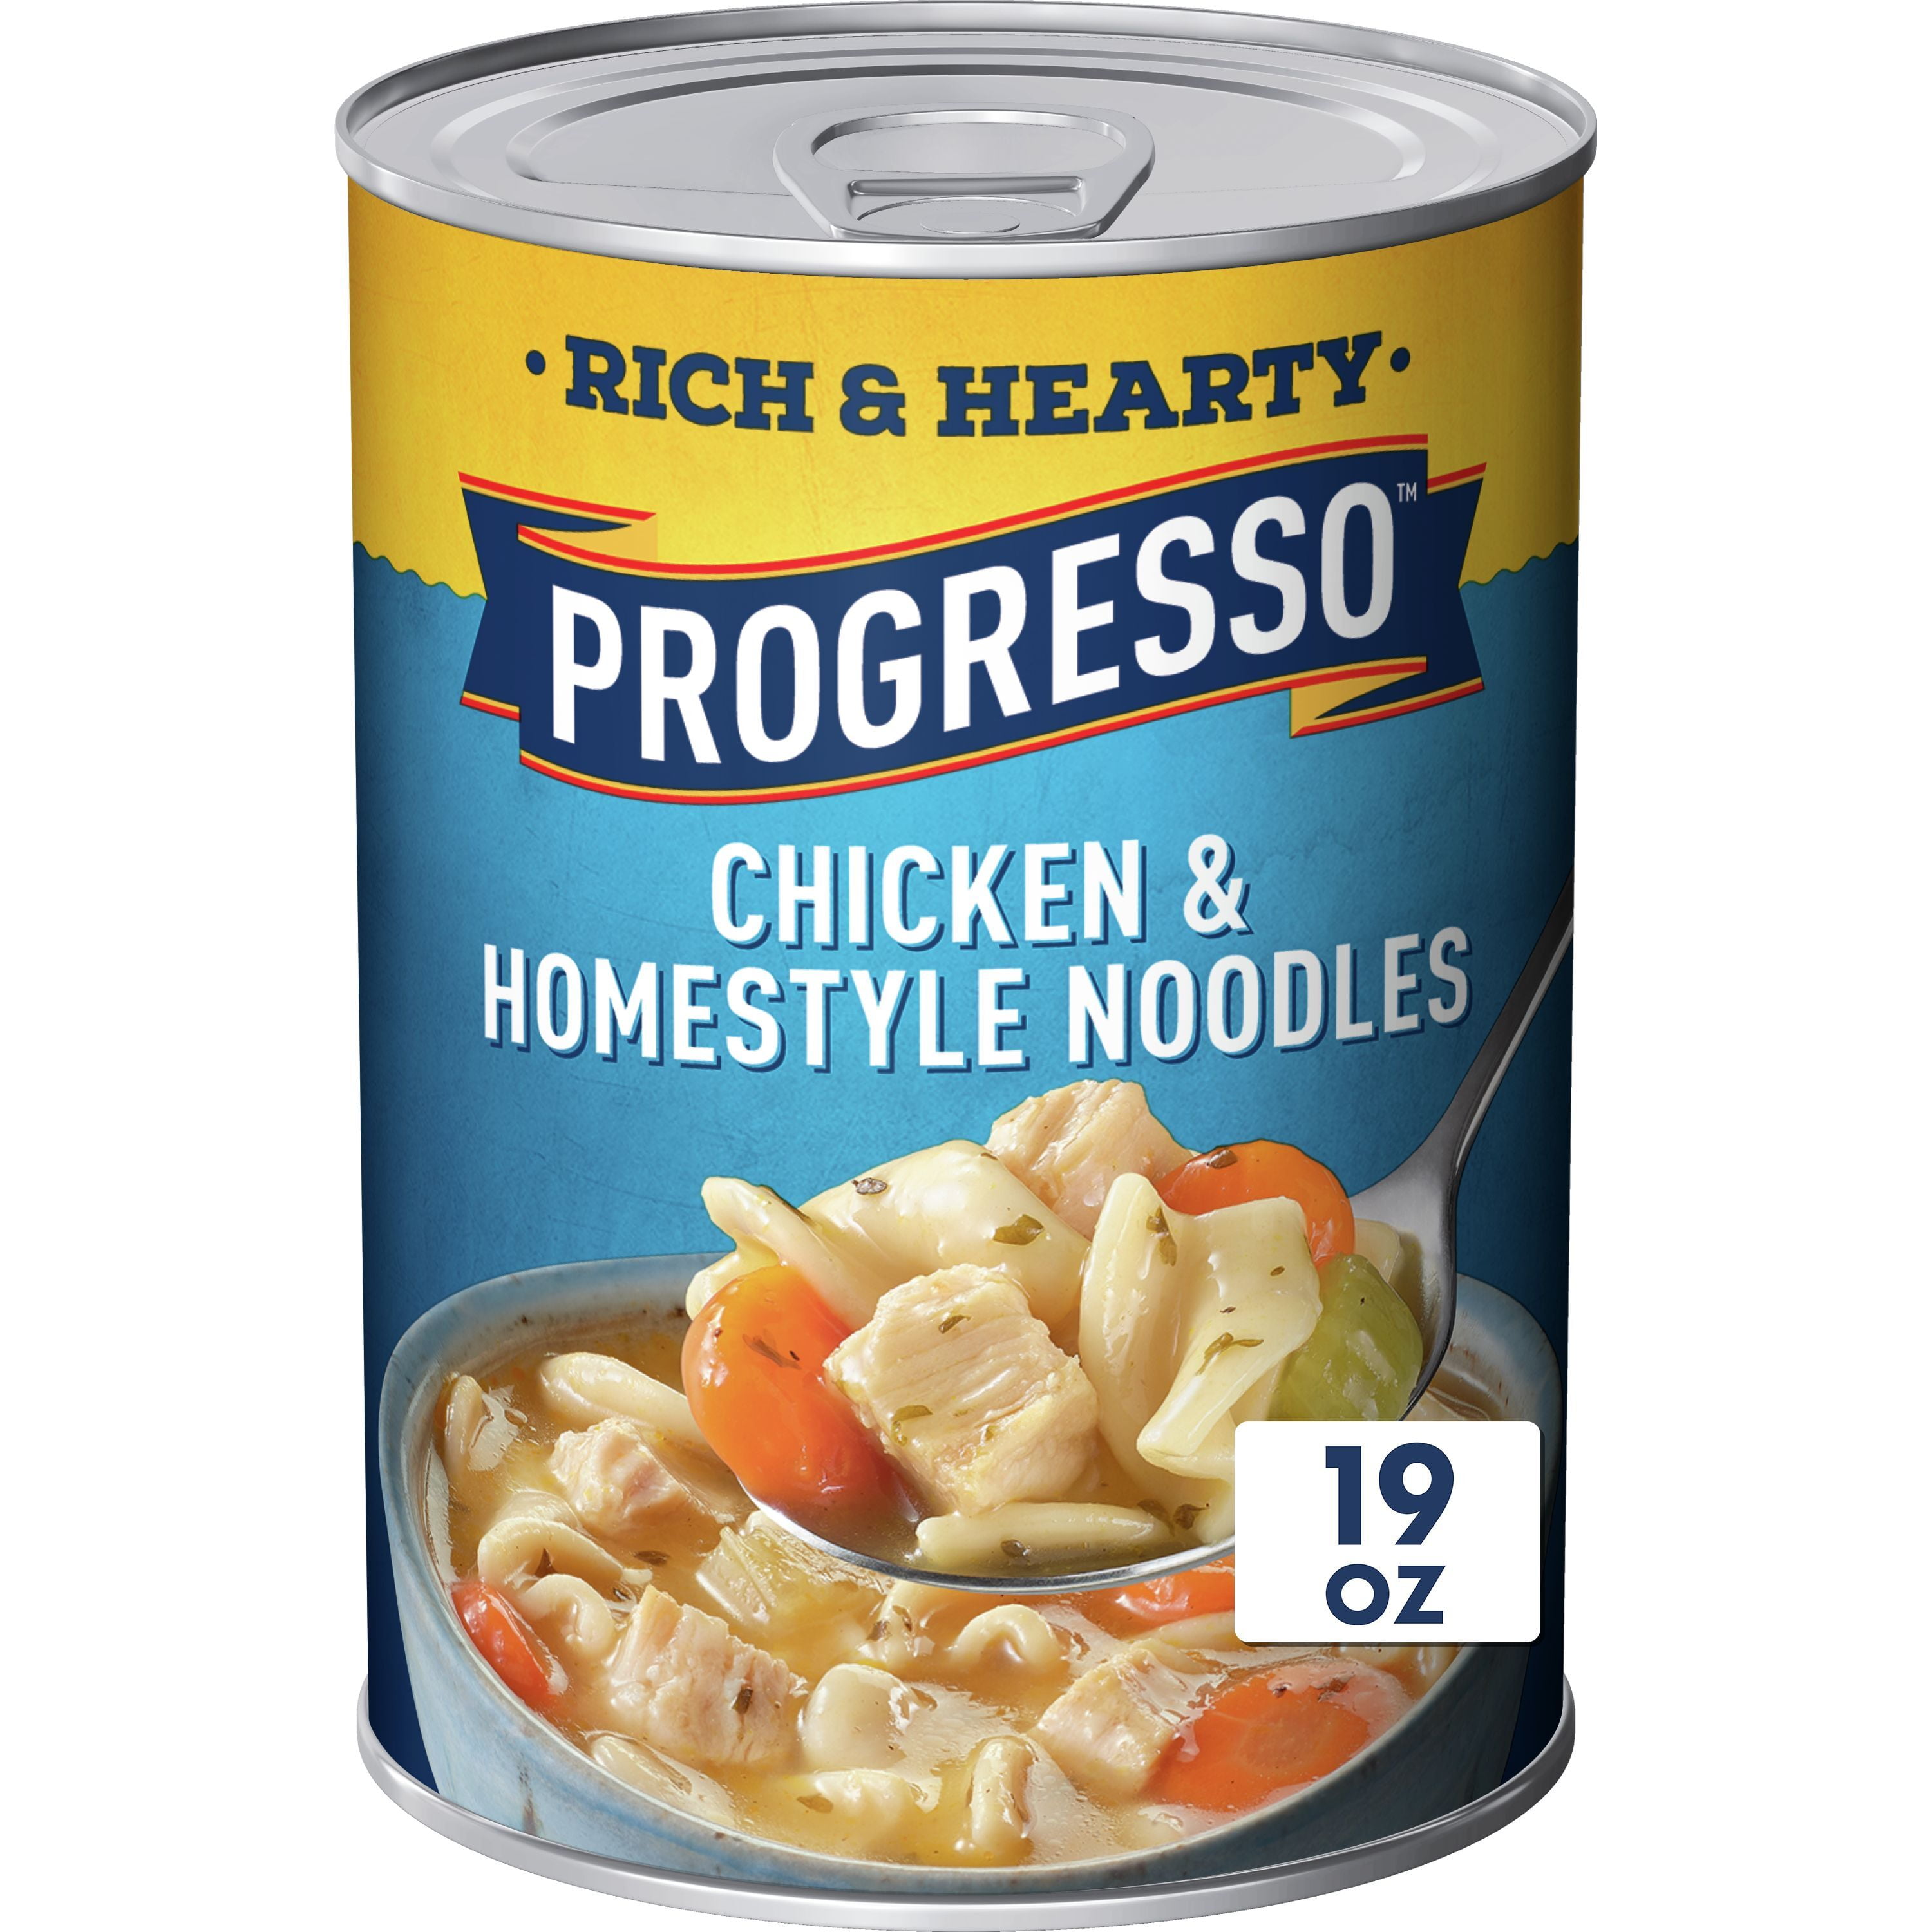 Progresso Rich & Hearty, Chicken & Homestyle Noodle Canned Soup, 19 oz.